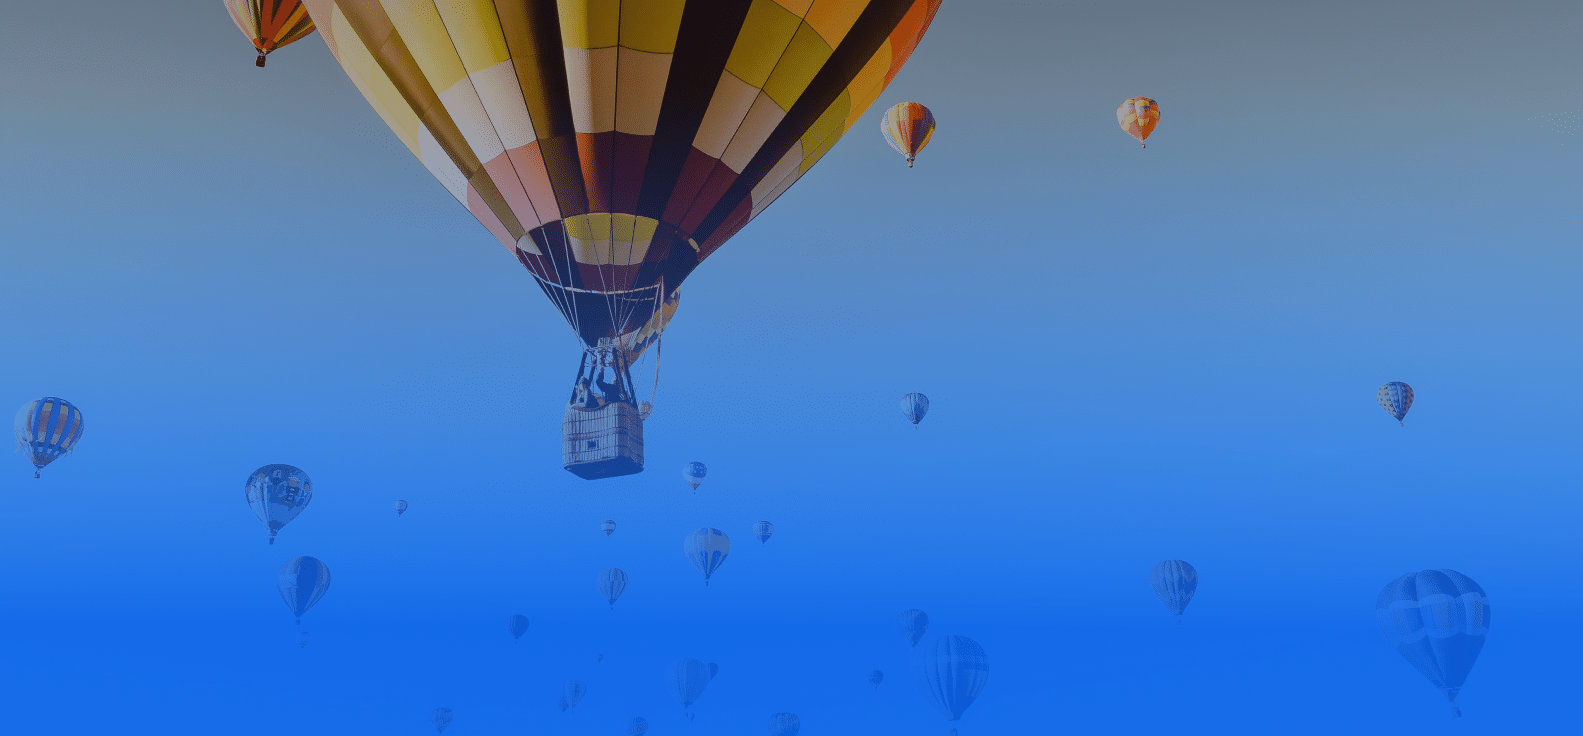 hot air balloons in the sky